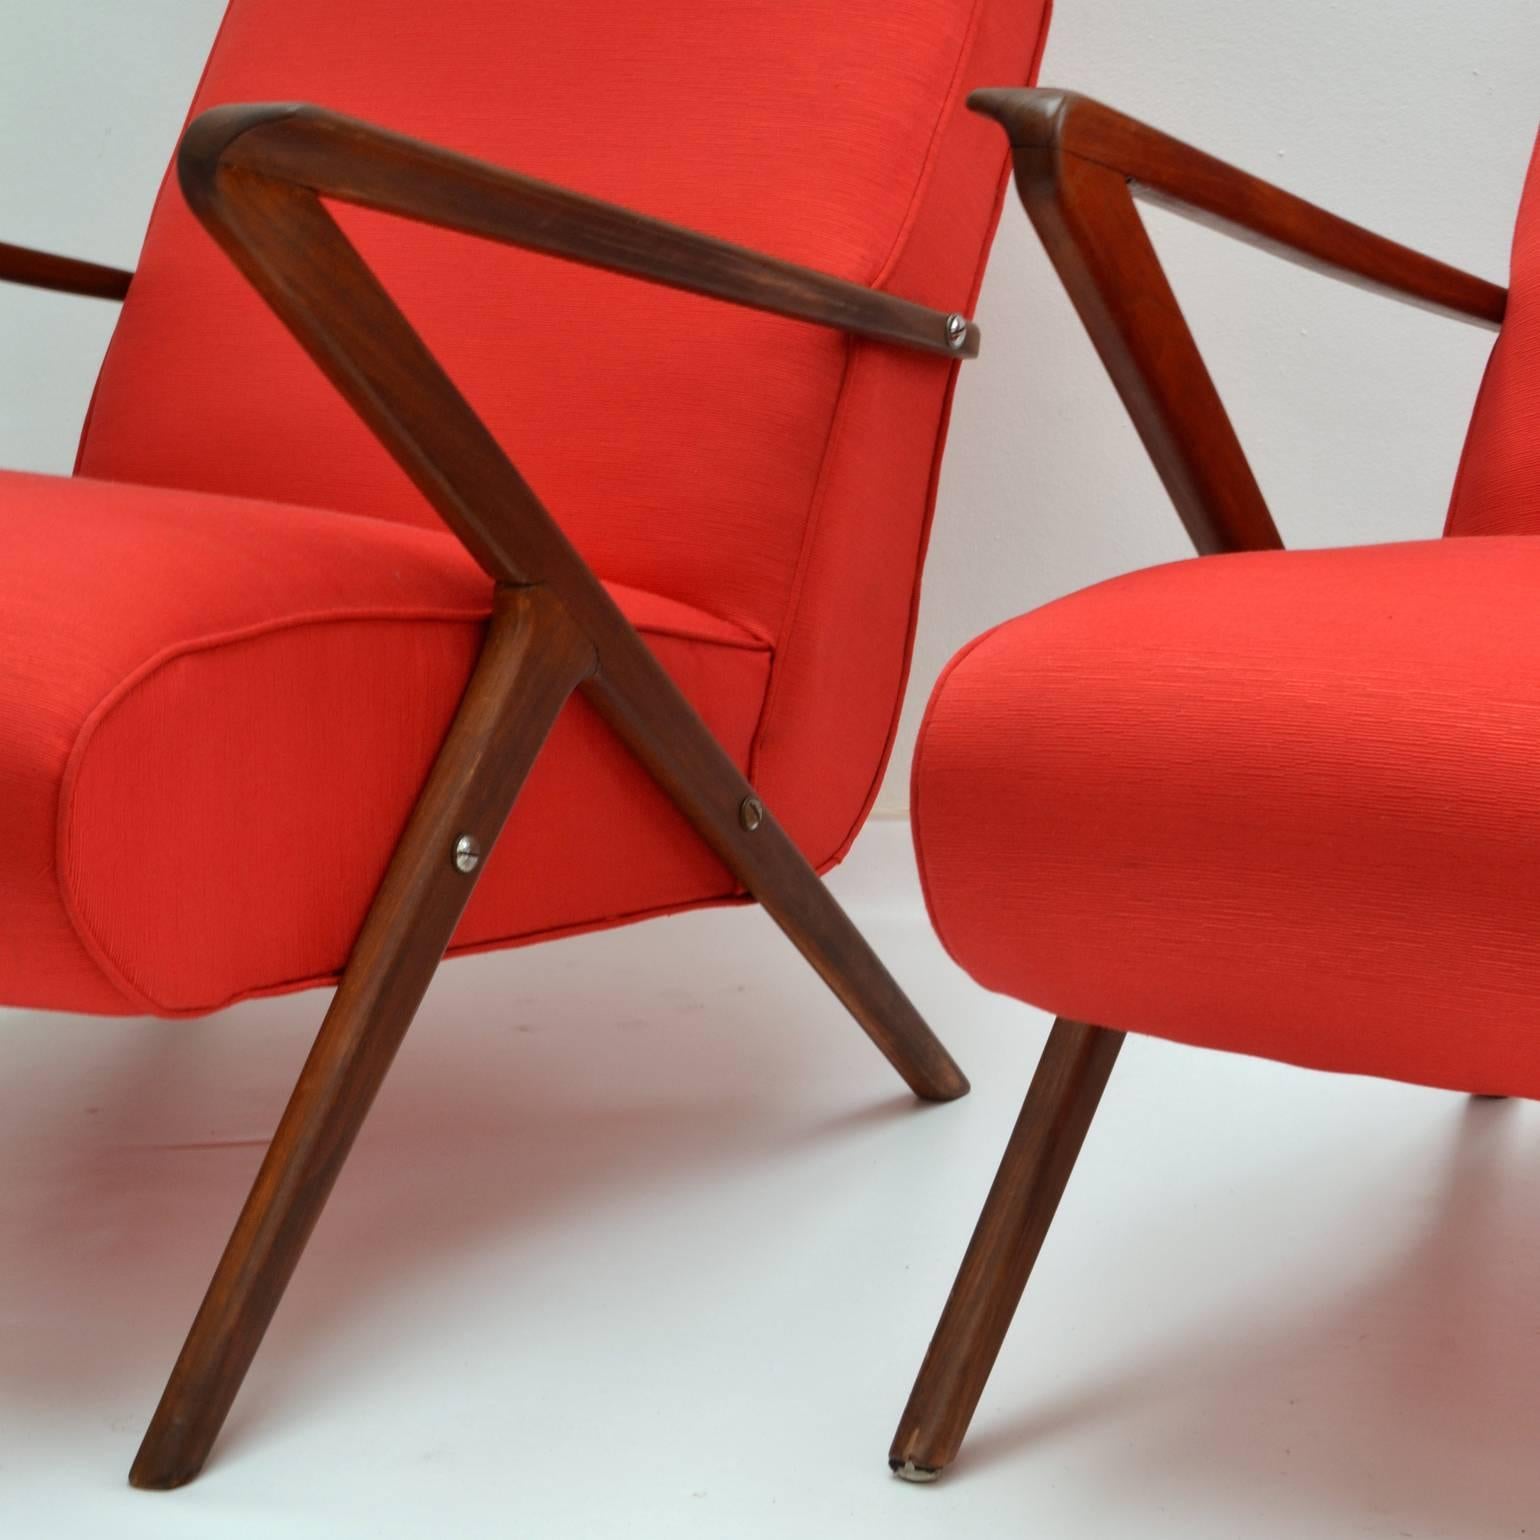 1950s Pair of Red Italian Lounge Chairs, Mahogany Frame with Pronounced Armrests 1